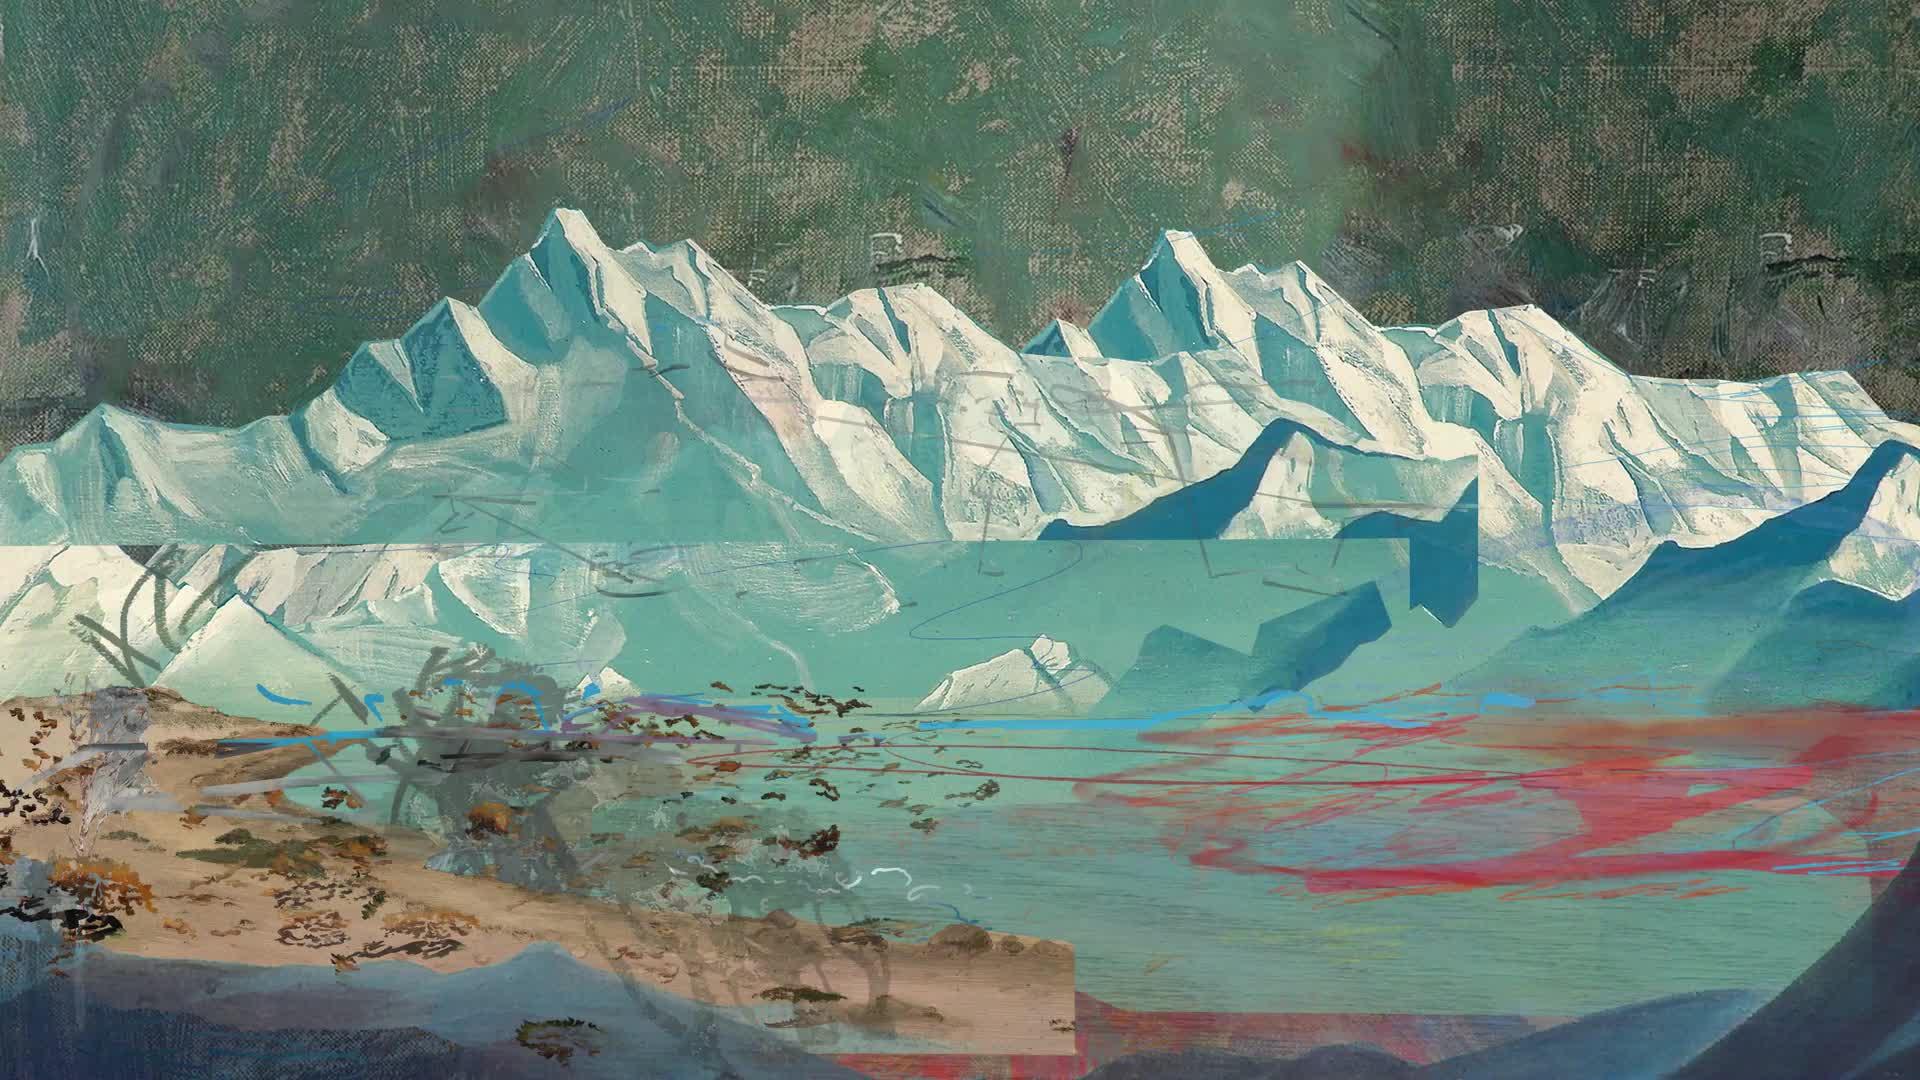 sea of snow Everest 1996 by Petra Cortright